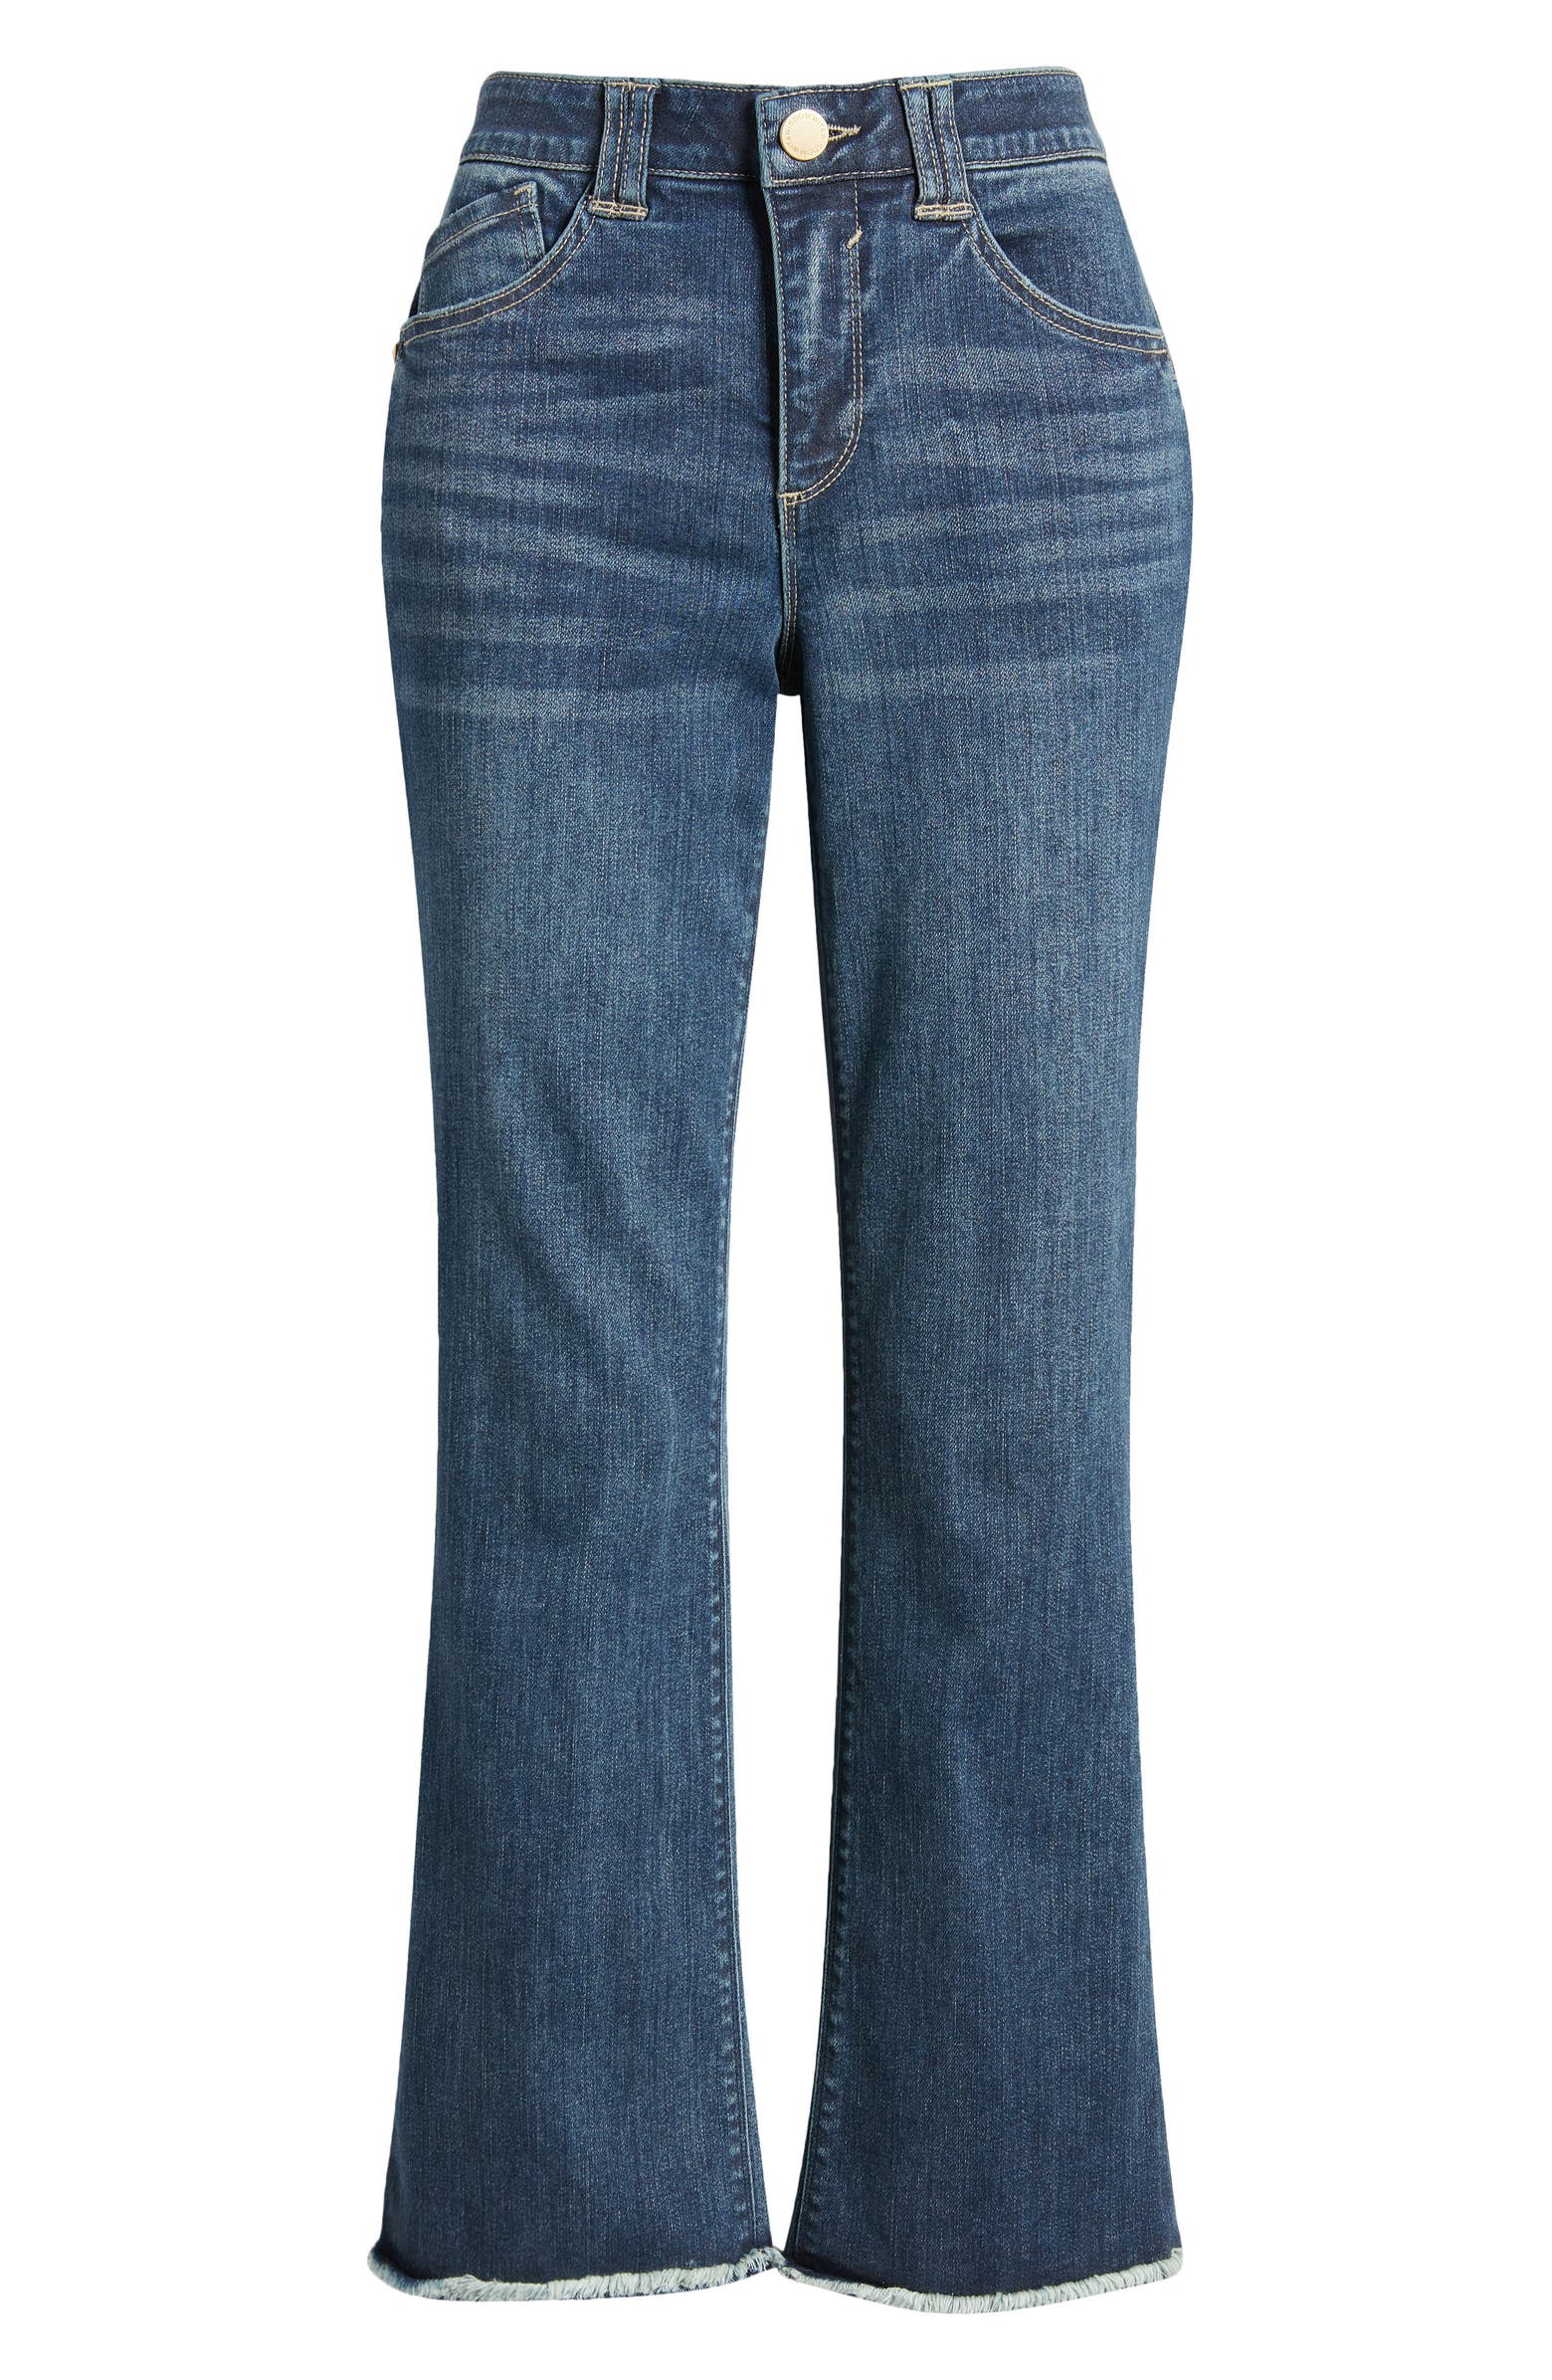 Wit & Wisdom 'Ab'Solution High Waist Ankle Flare Jeans | Nordstrom